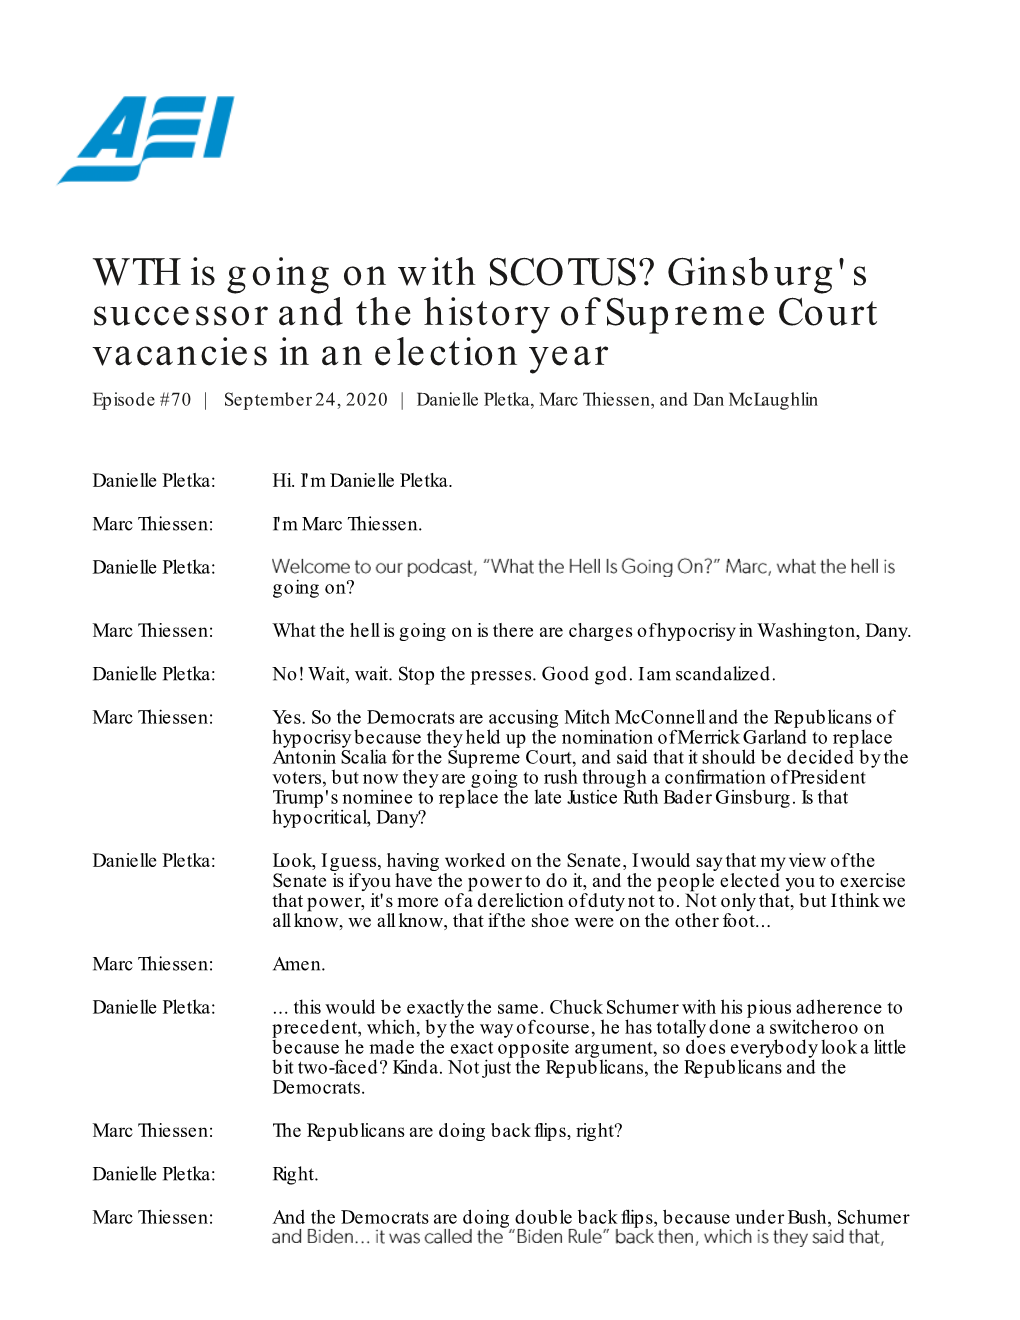 Ginsburg's Successor and the History of Supreme Court Vacancies in an Election Year